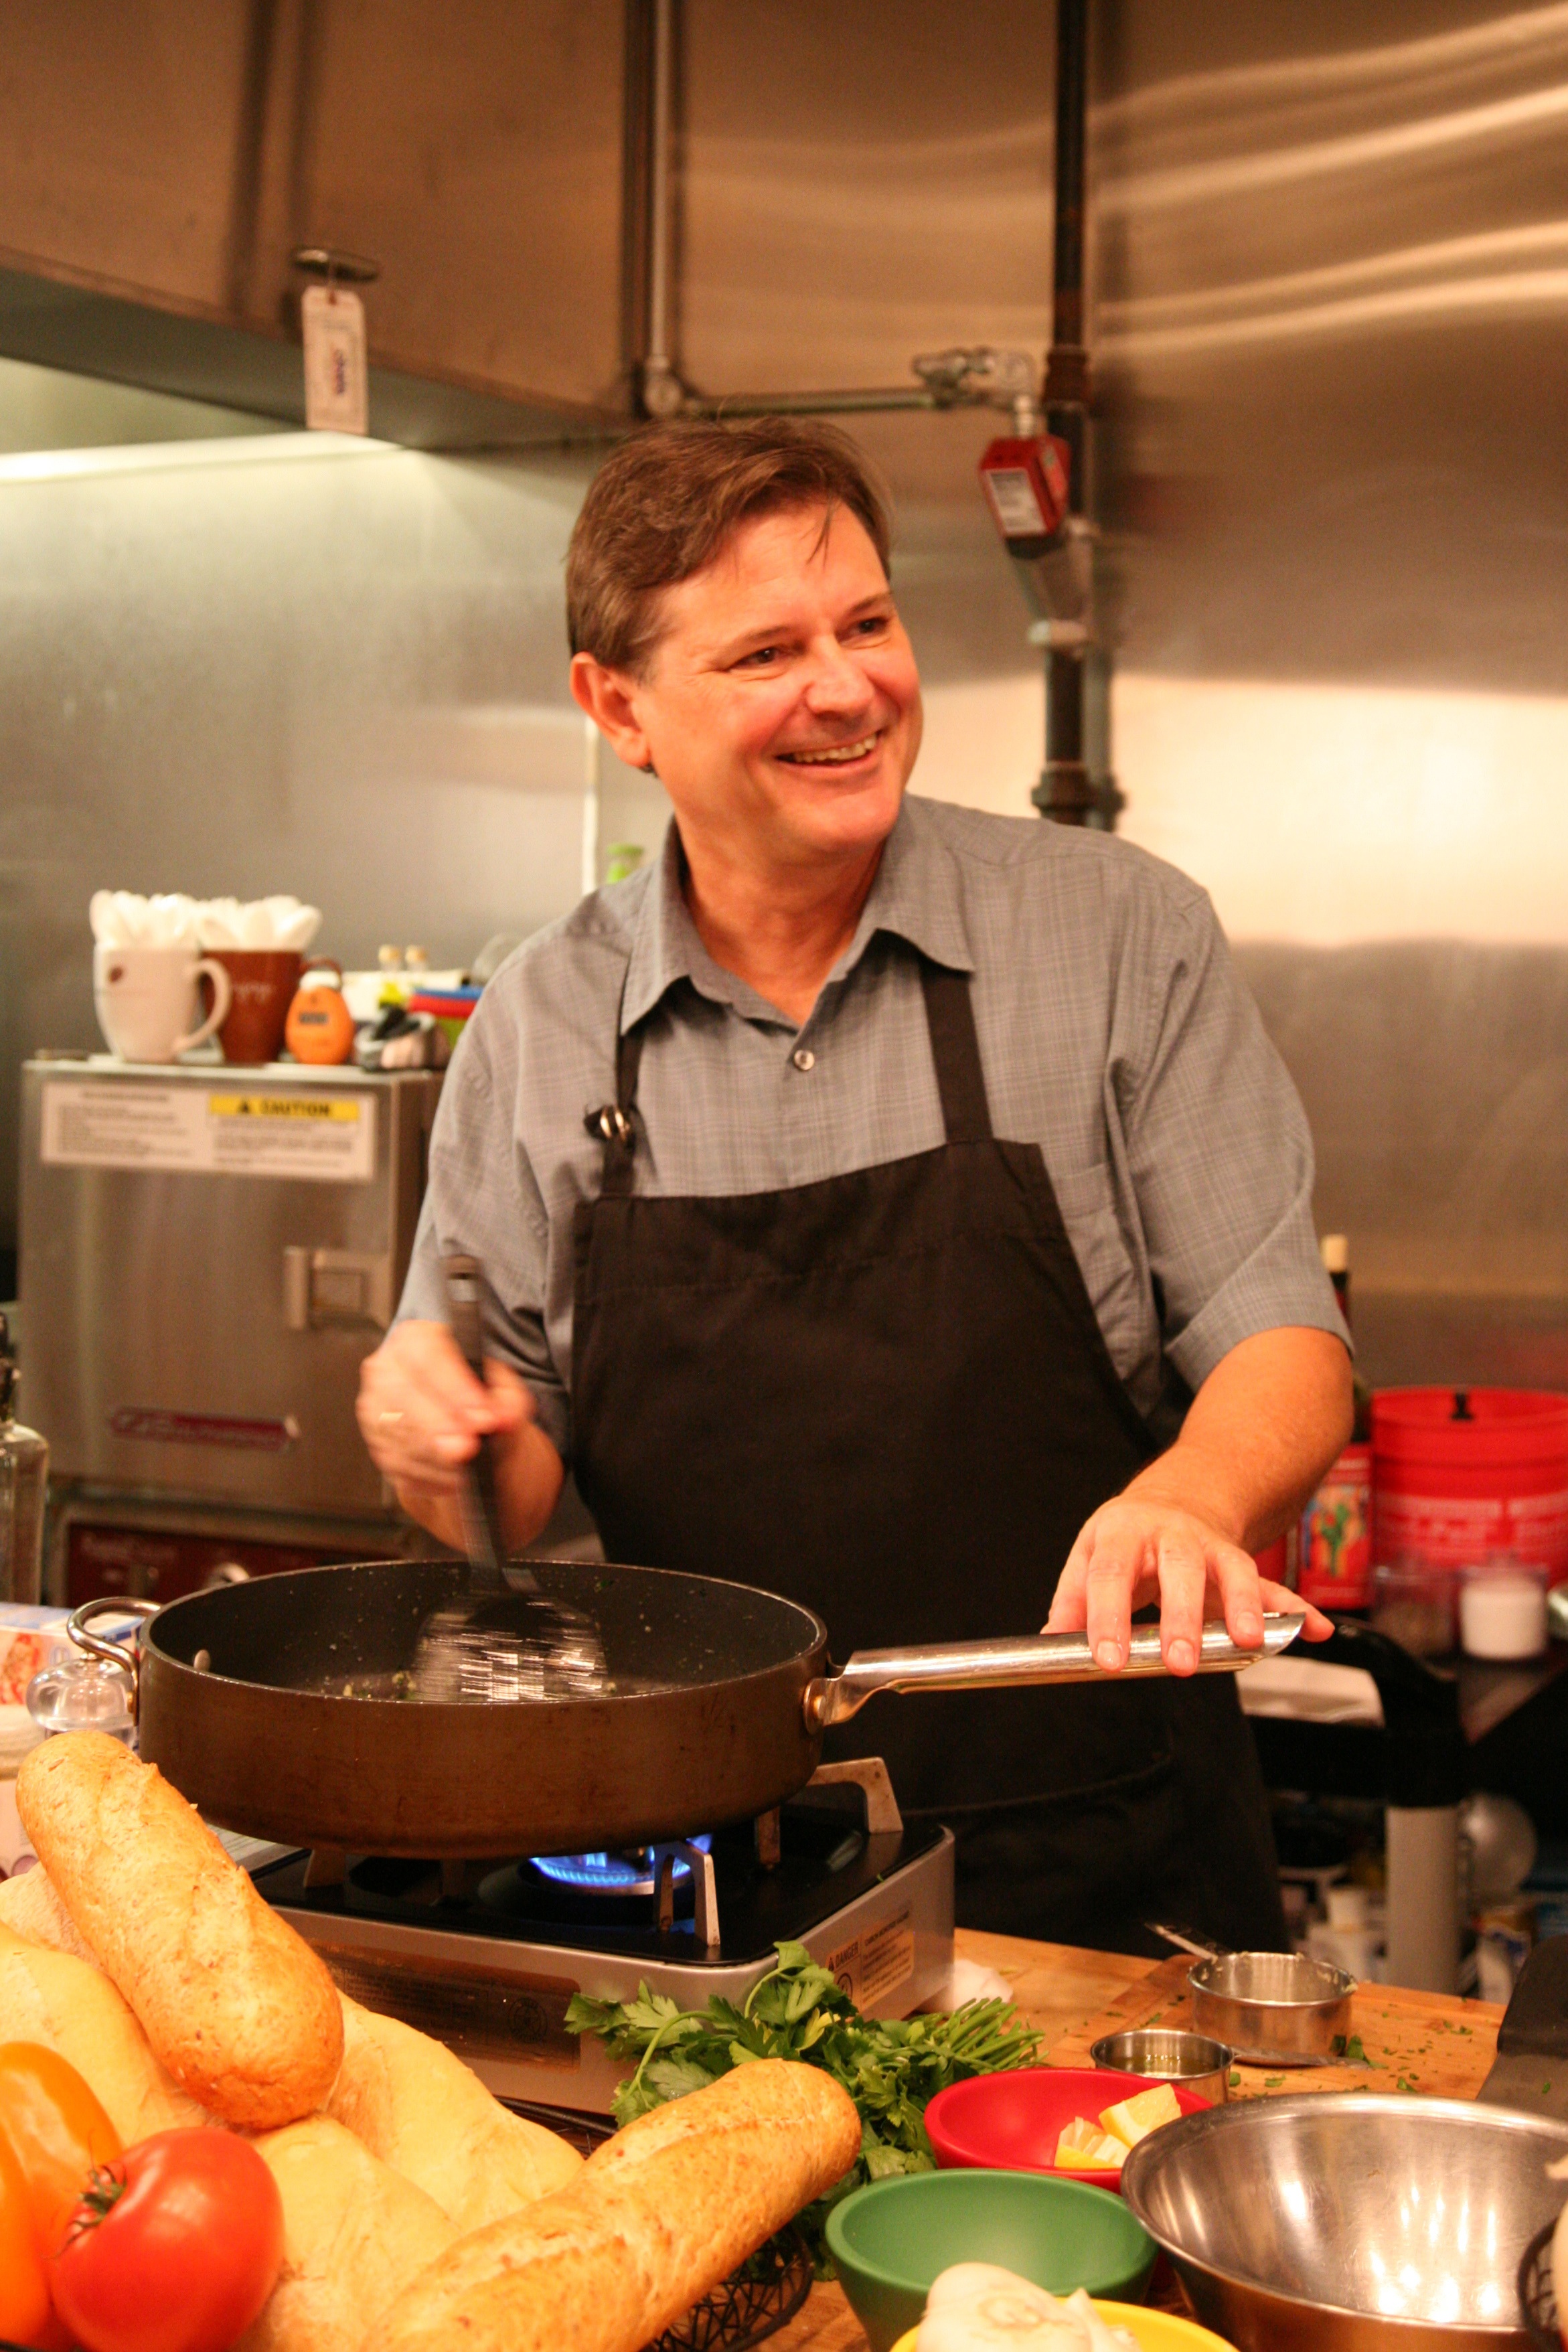 Warren cooking and smiling